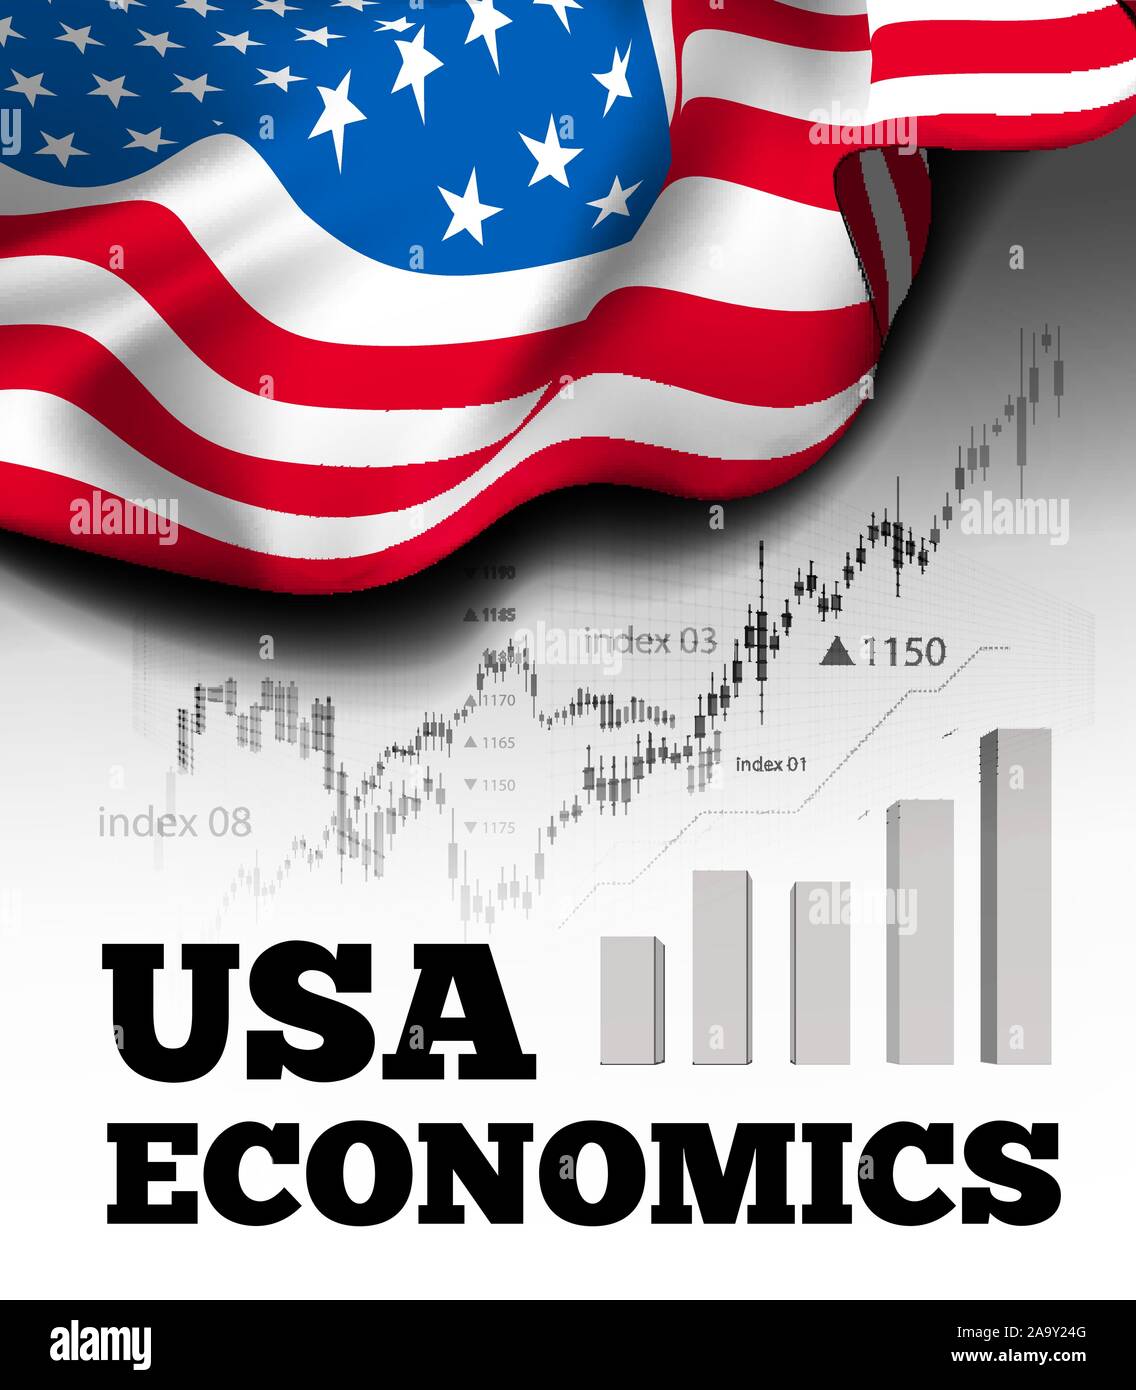 American economics vector illustration with flag of the USA and business chart, bar chart stock numbers bull market, uptrend line graph symbolizes the Stock Vector